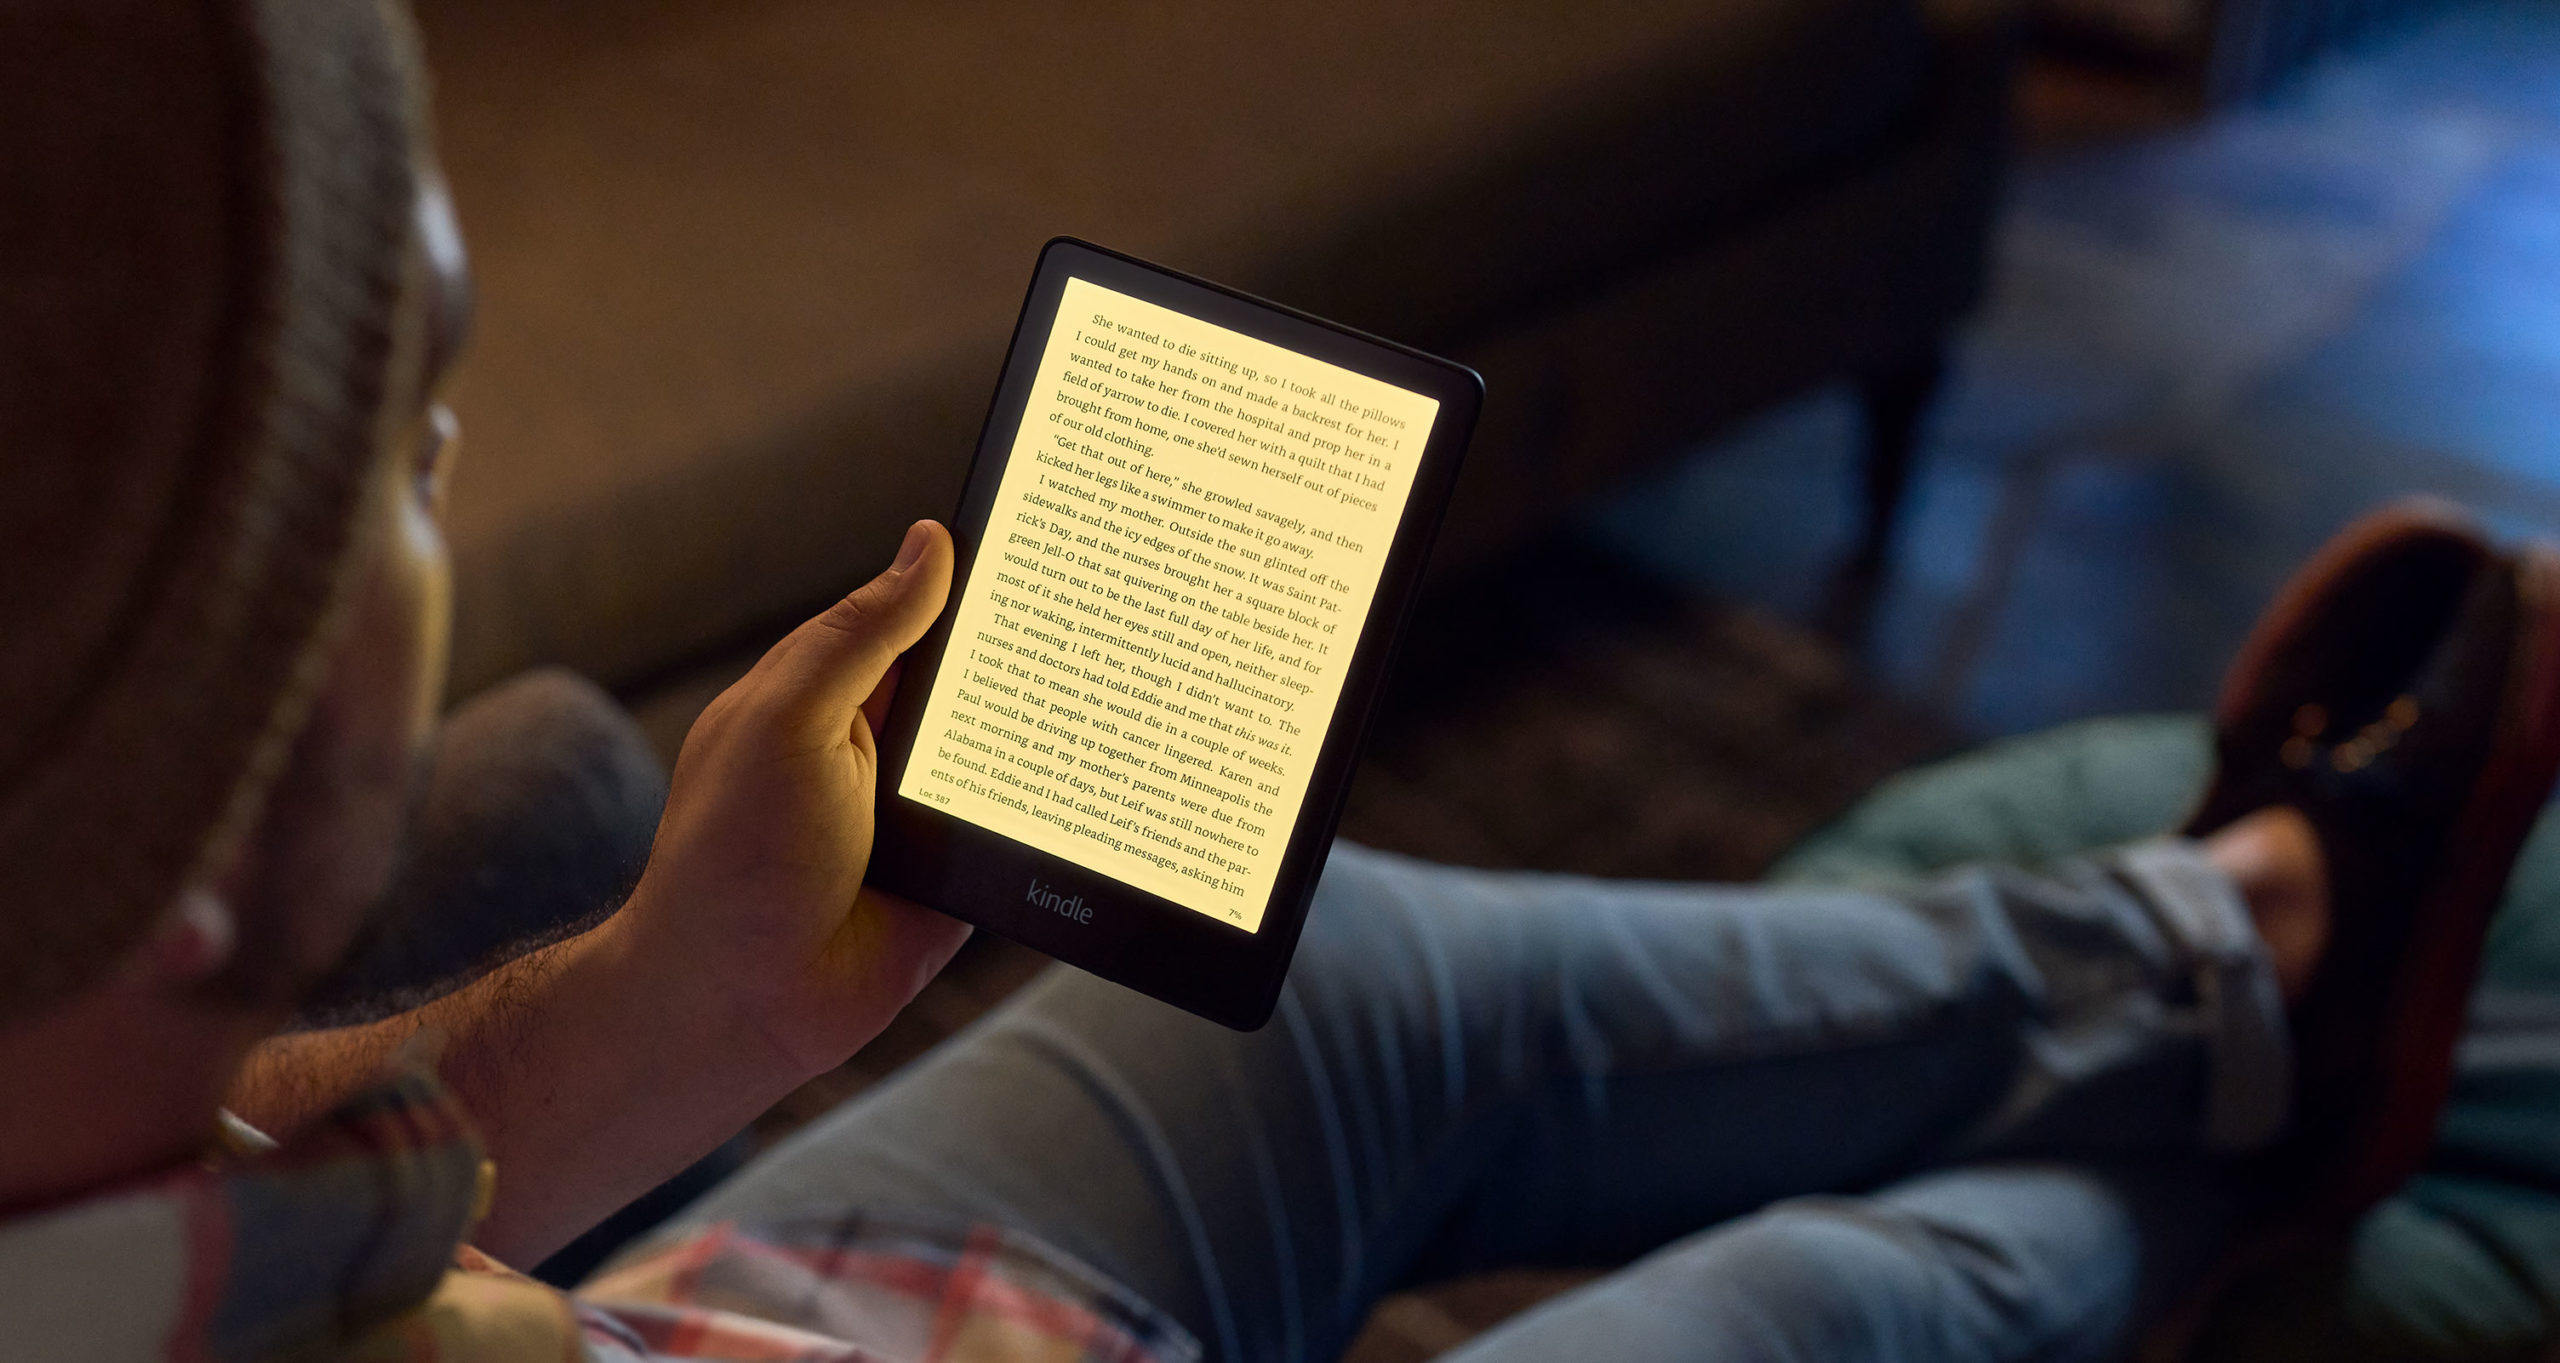 Amazon’s new Kindle Paperwhite the latest in its line of popular e-book reading devices, but official stock has run out in China, forcing consumers to turn to third-party sellers. Photo: Amazon